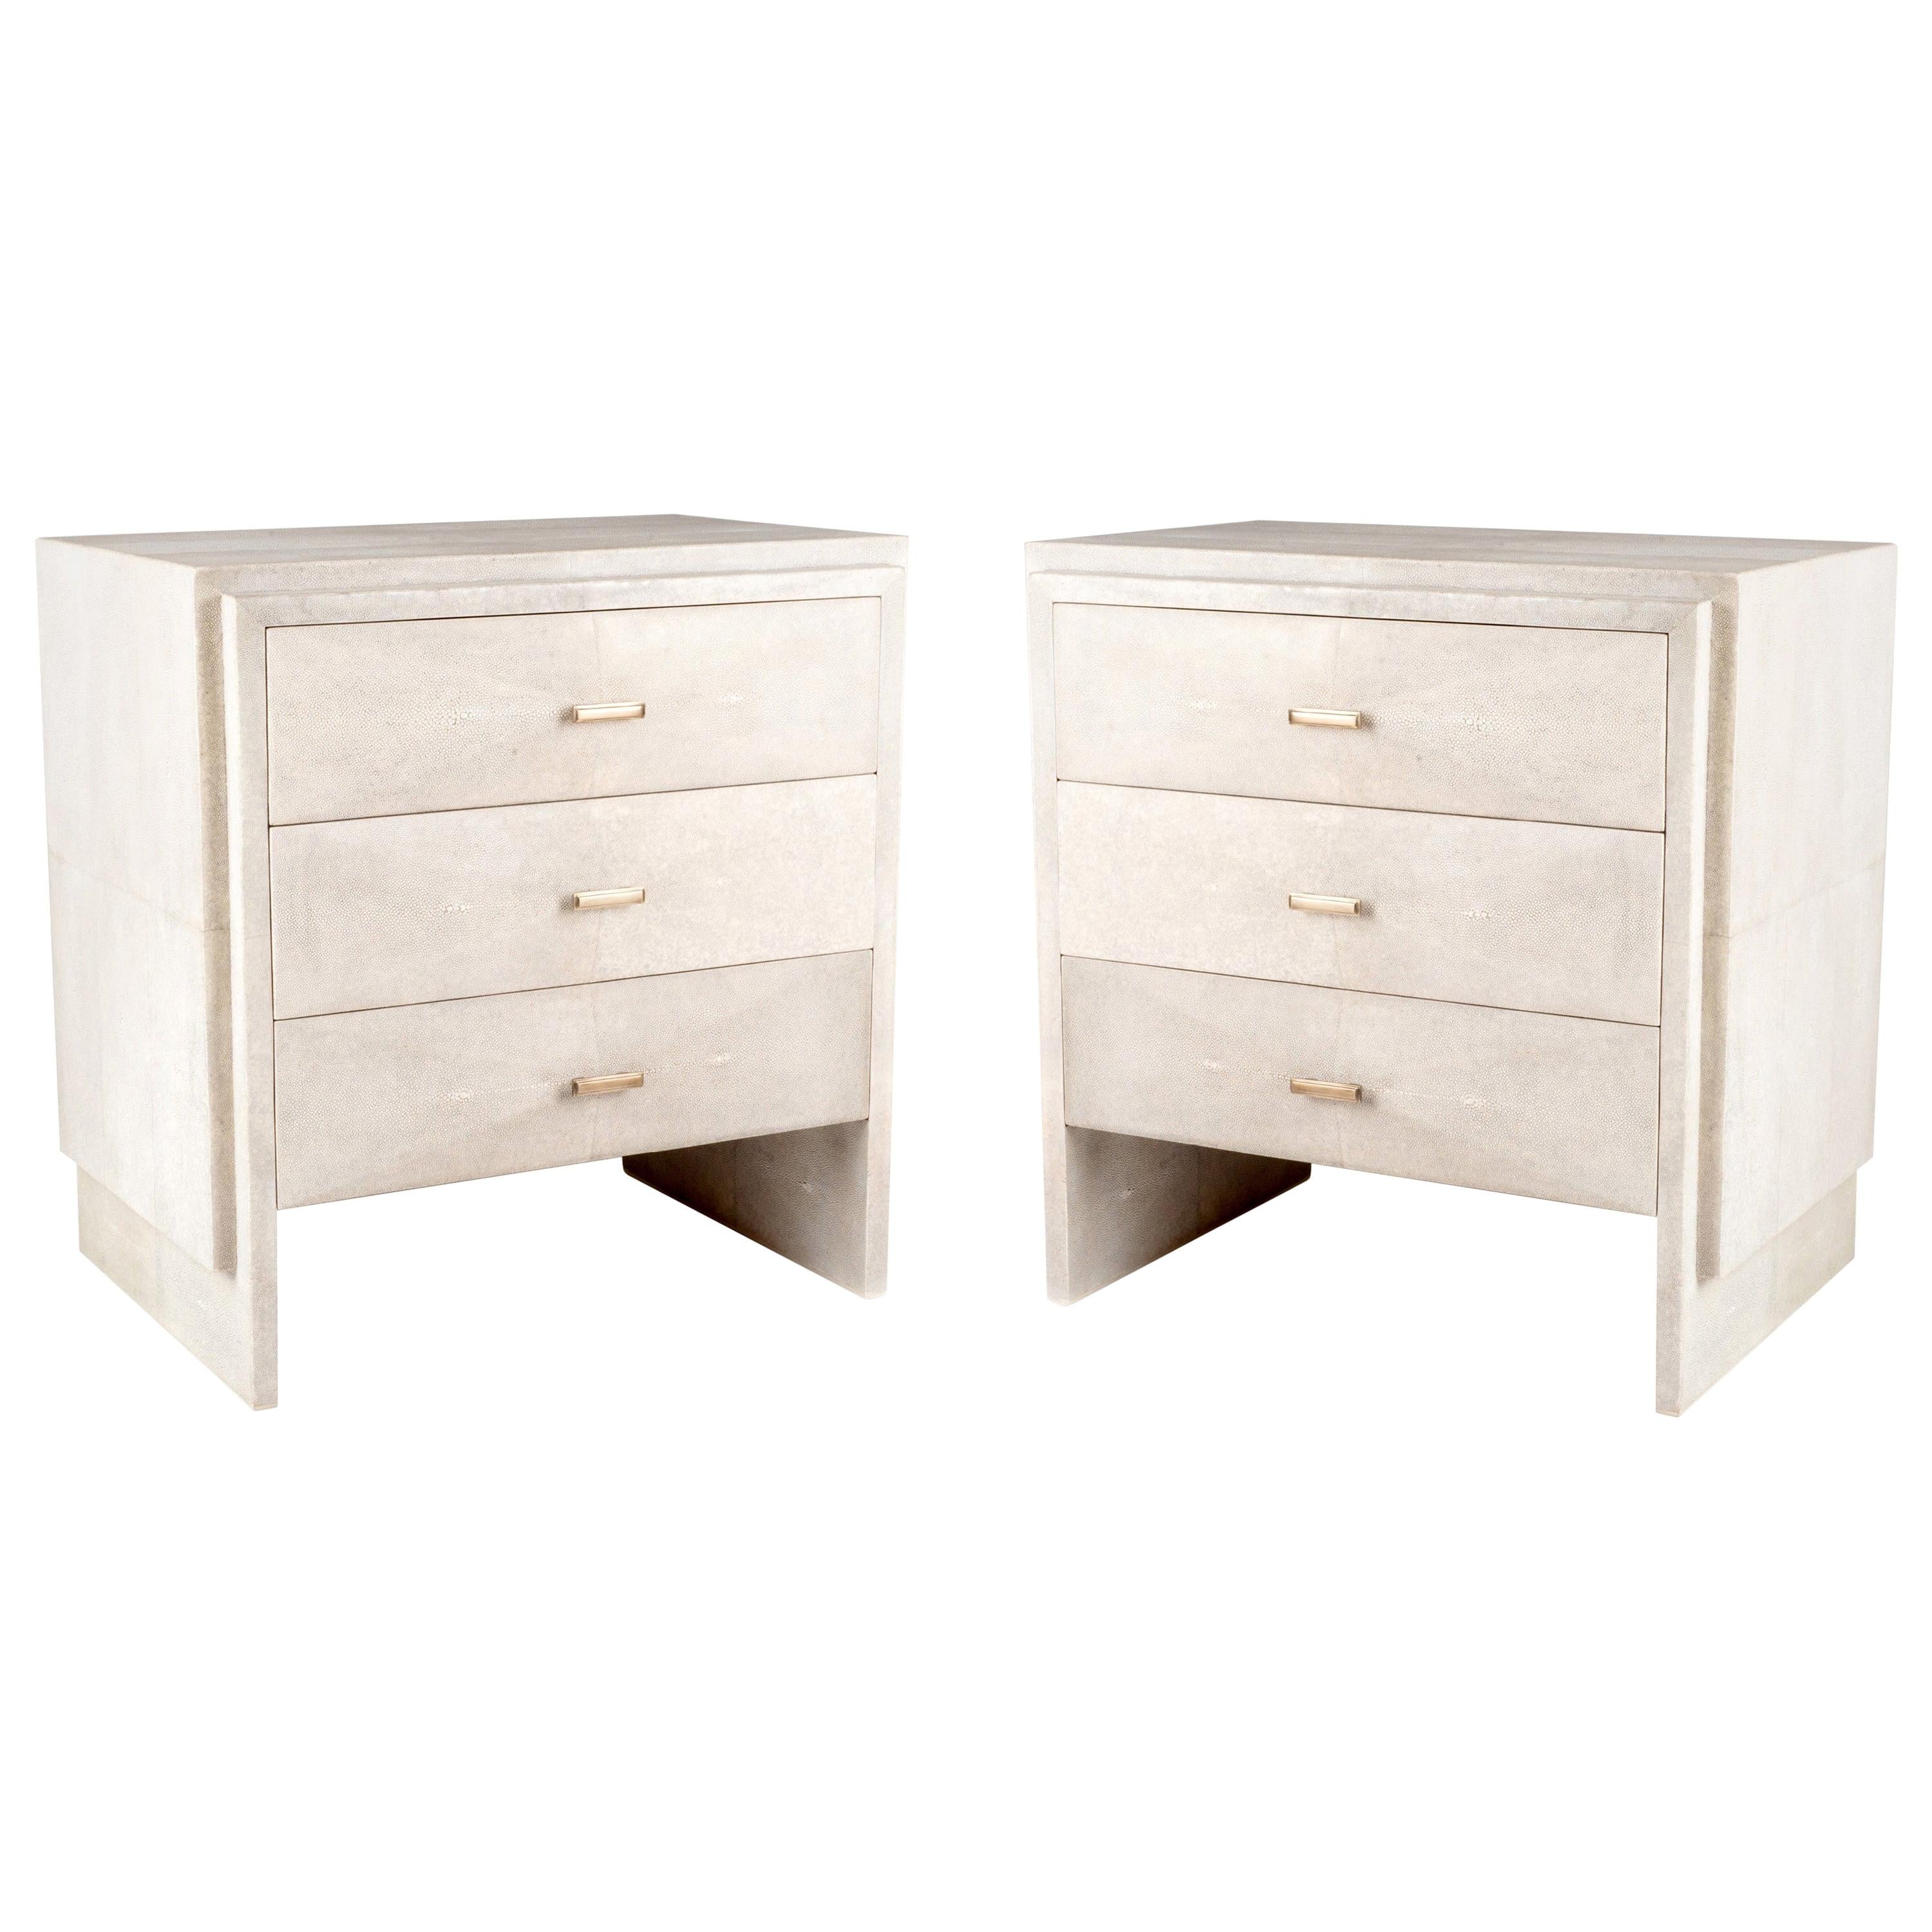 Set of Two Shagreen Nightstands with Beveled Drawers by R&Y Augousti For Sale